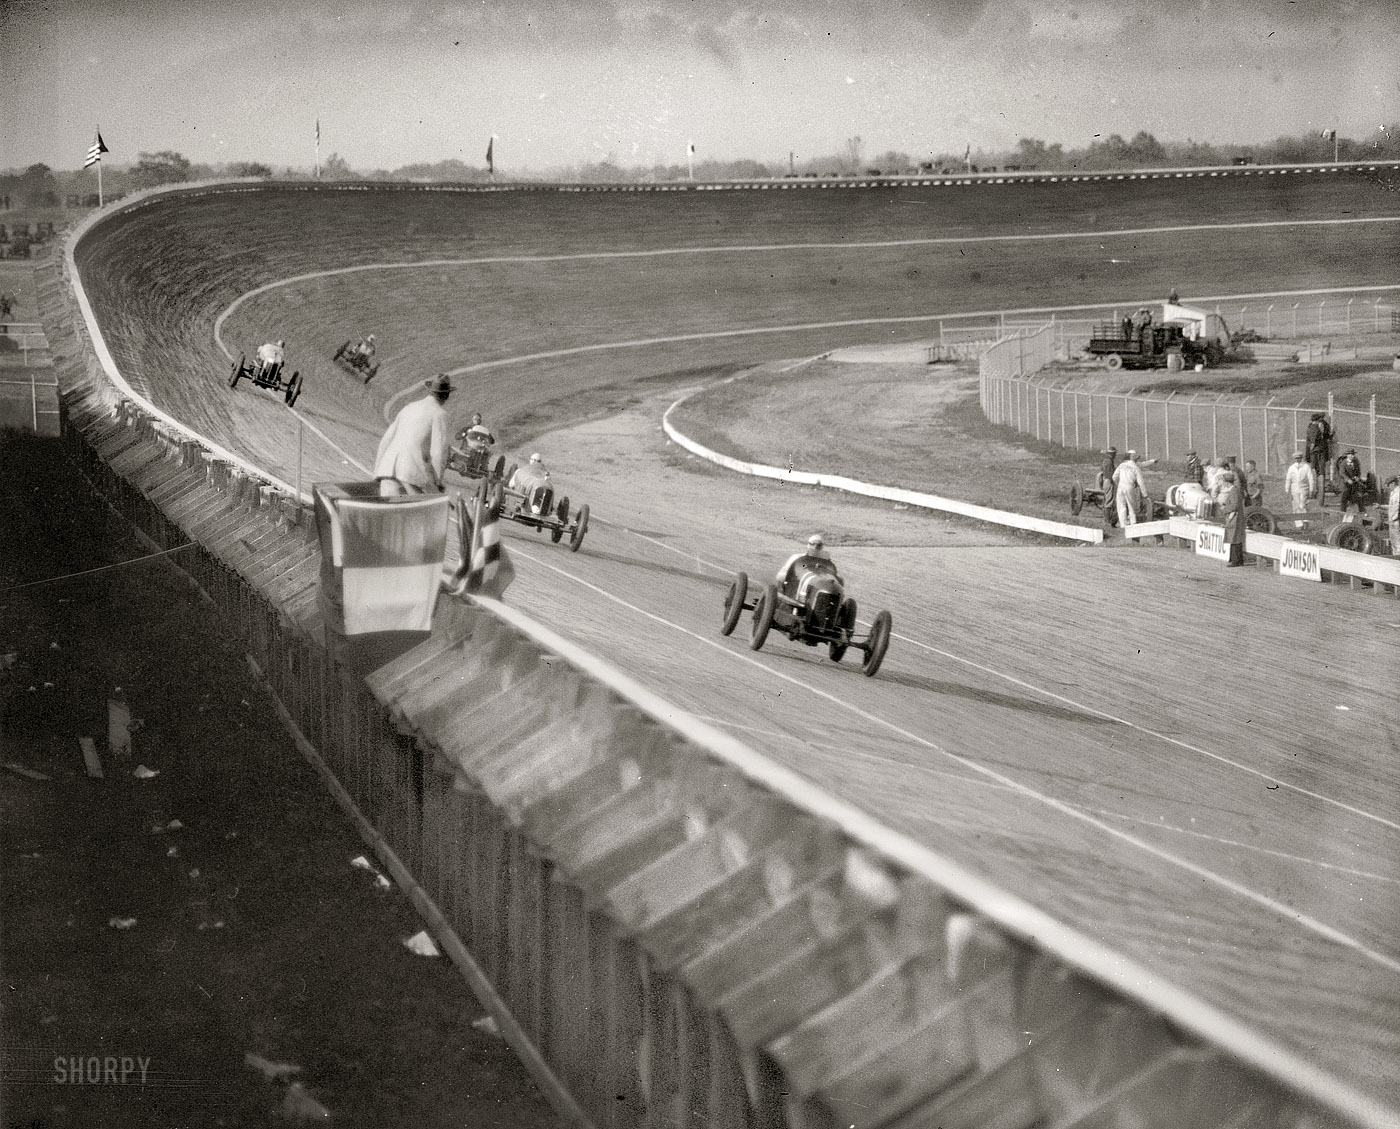 July 11, 1925. Another look at the lineup on Laurel Speedway's board track. National Photo Company Collection glass negative. View full size.